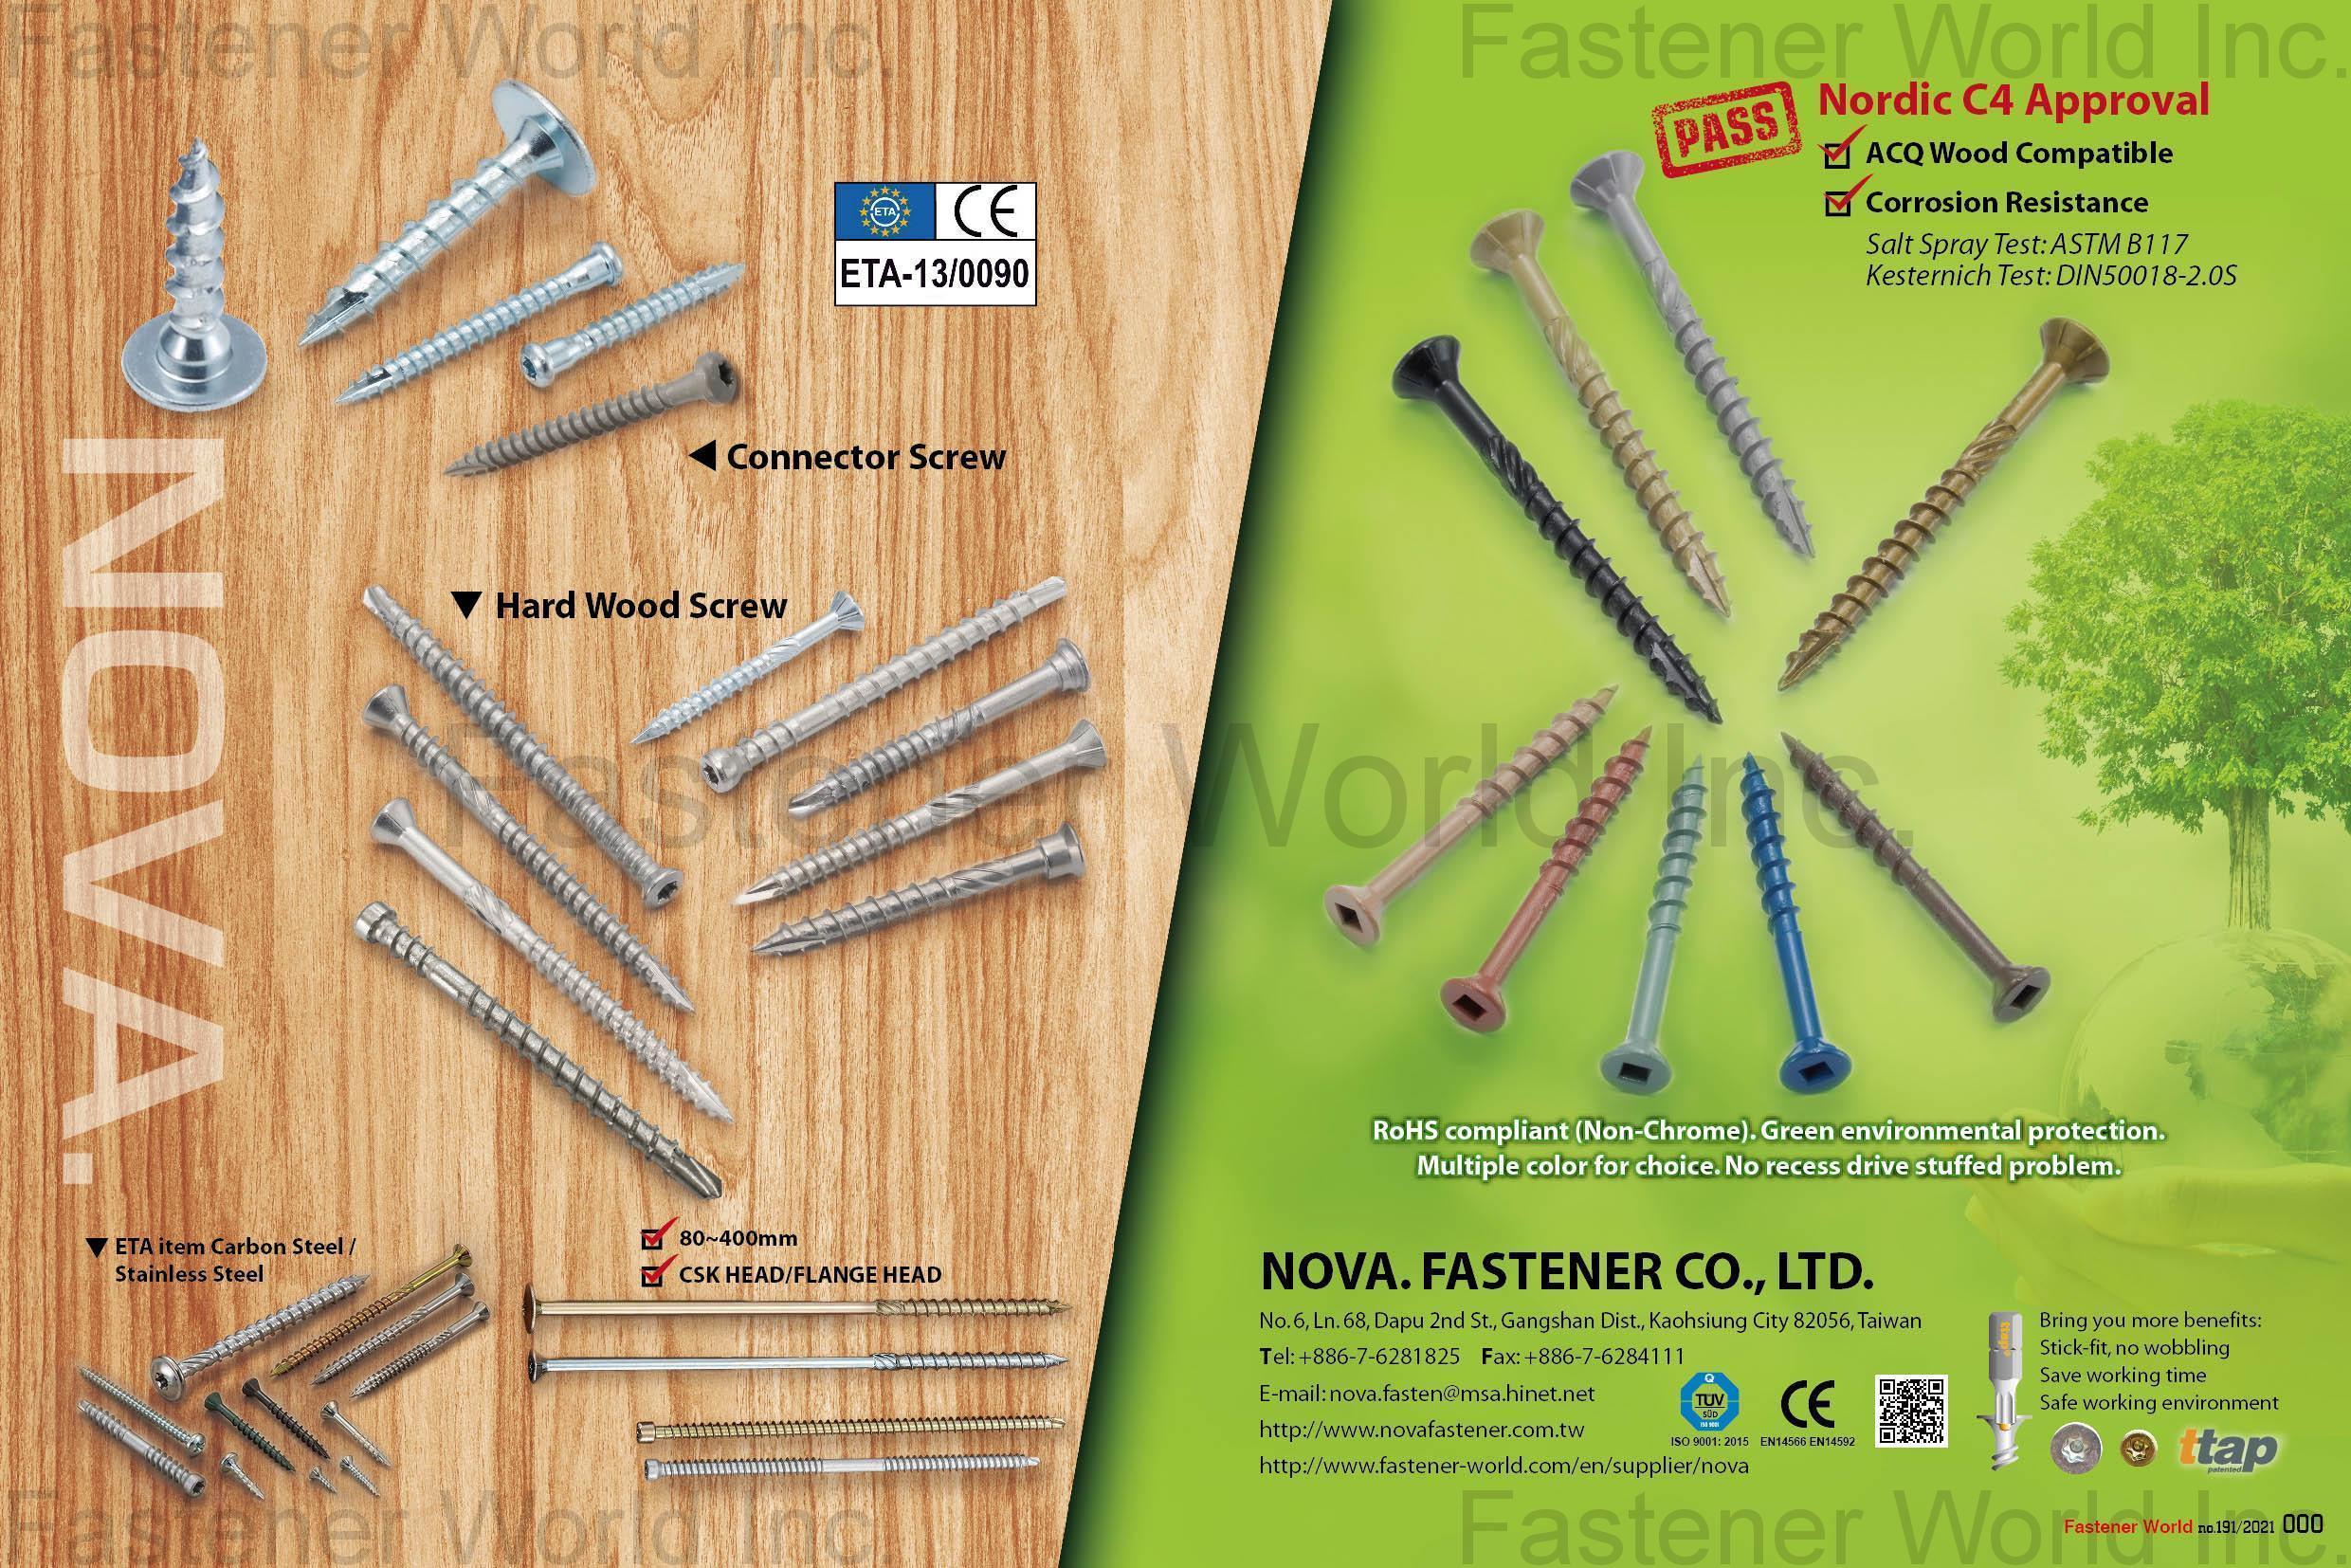 NOVA. FASTENER CO., LTD.  , STAINLESS STEEL SCREWCAP SCREW (STEEL SCREW WITH 304S.S CAP)SELF DRILLING SRCEW(#1~6POINT,LENGTH UP TO 400mm)TAPPING SCREW THREAD FORMING SCREWBI-METAL SCREWSPECIAL/AUTOMATIC ITEM(PPAP III REPORT AVAILABLE)